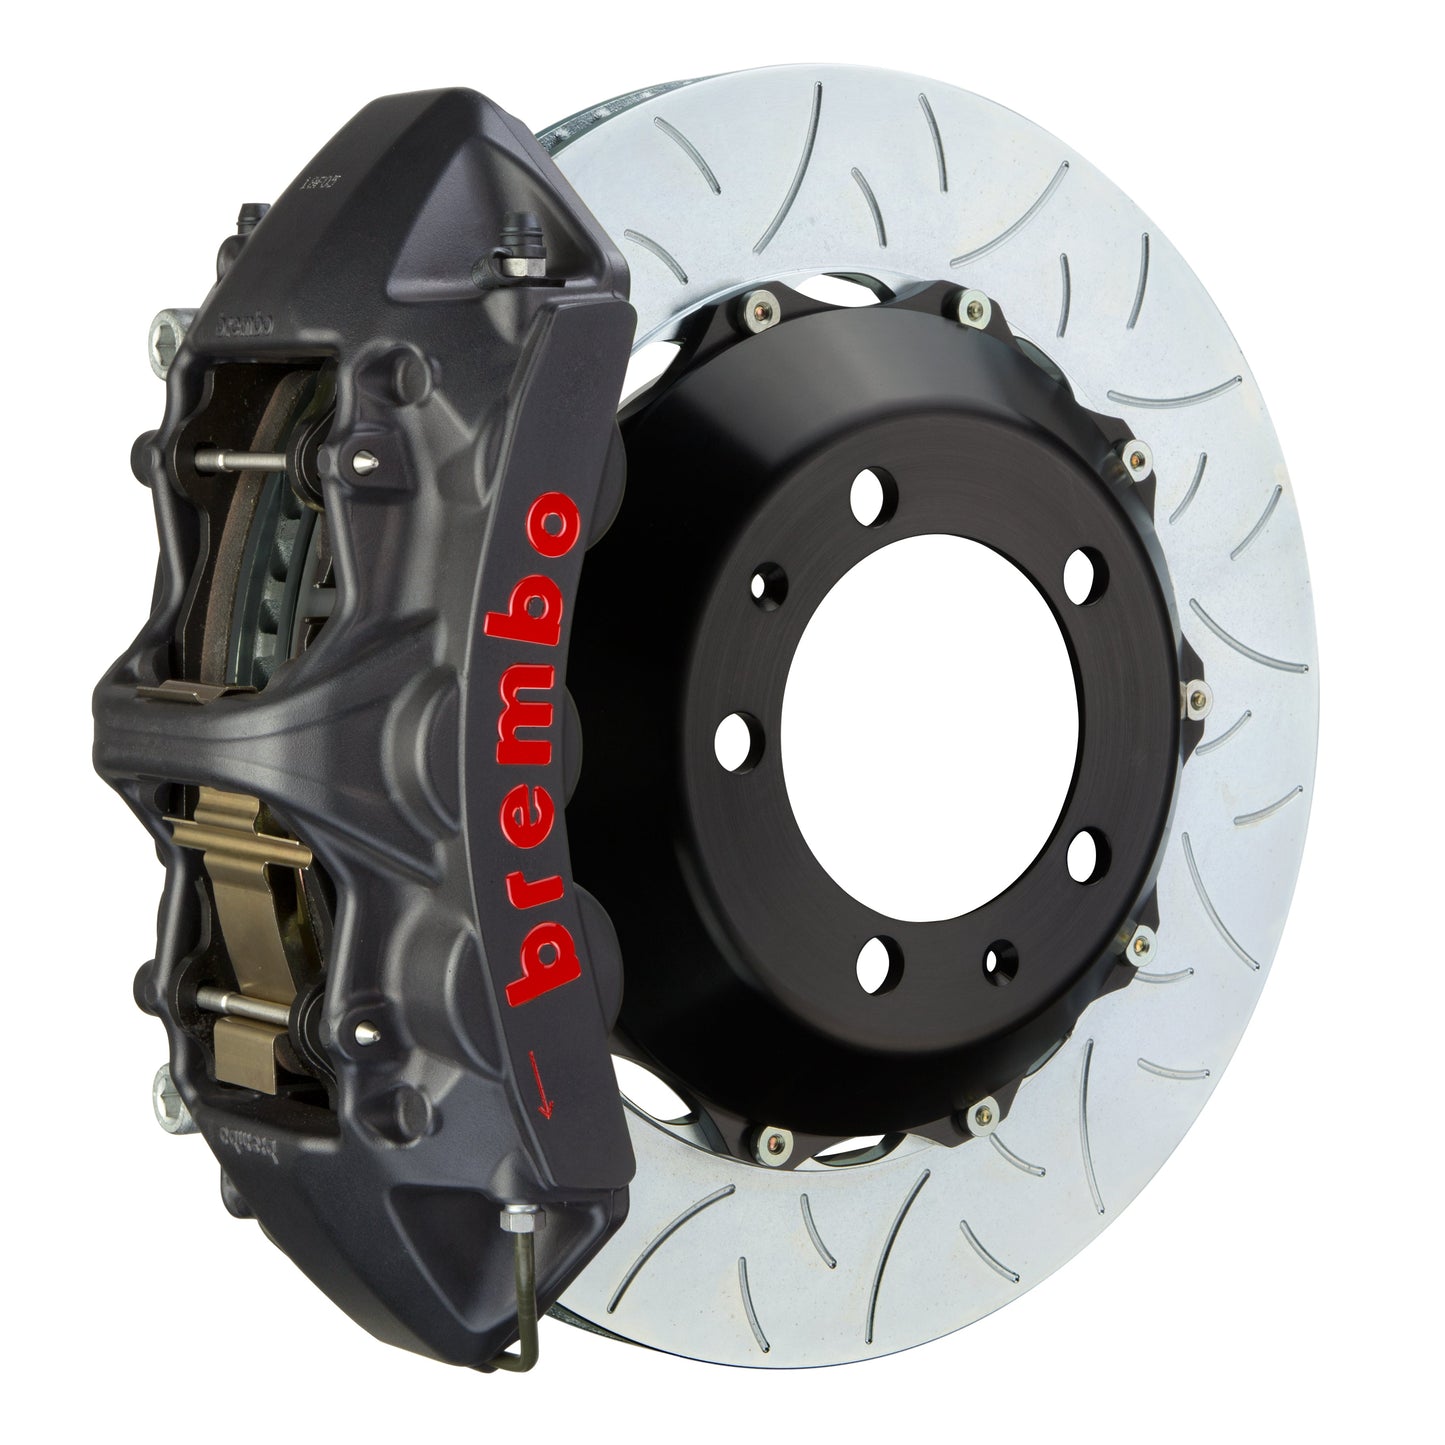 Front Brembo Gran Turismo Braking Upgrade Kit (1M18040AS) GT / S6 Caliper with 6-Pistons & 2-piece 355x32 Disc